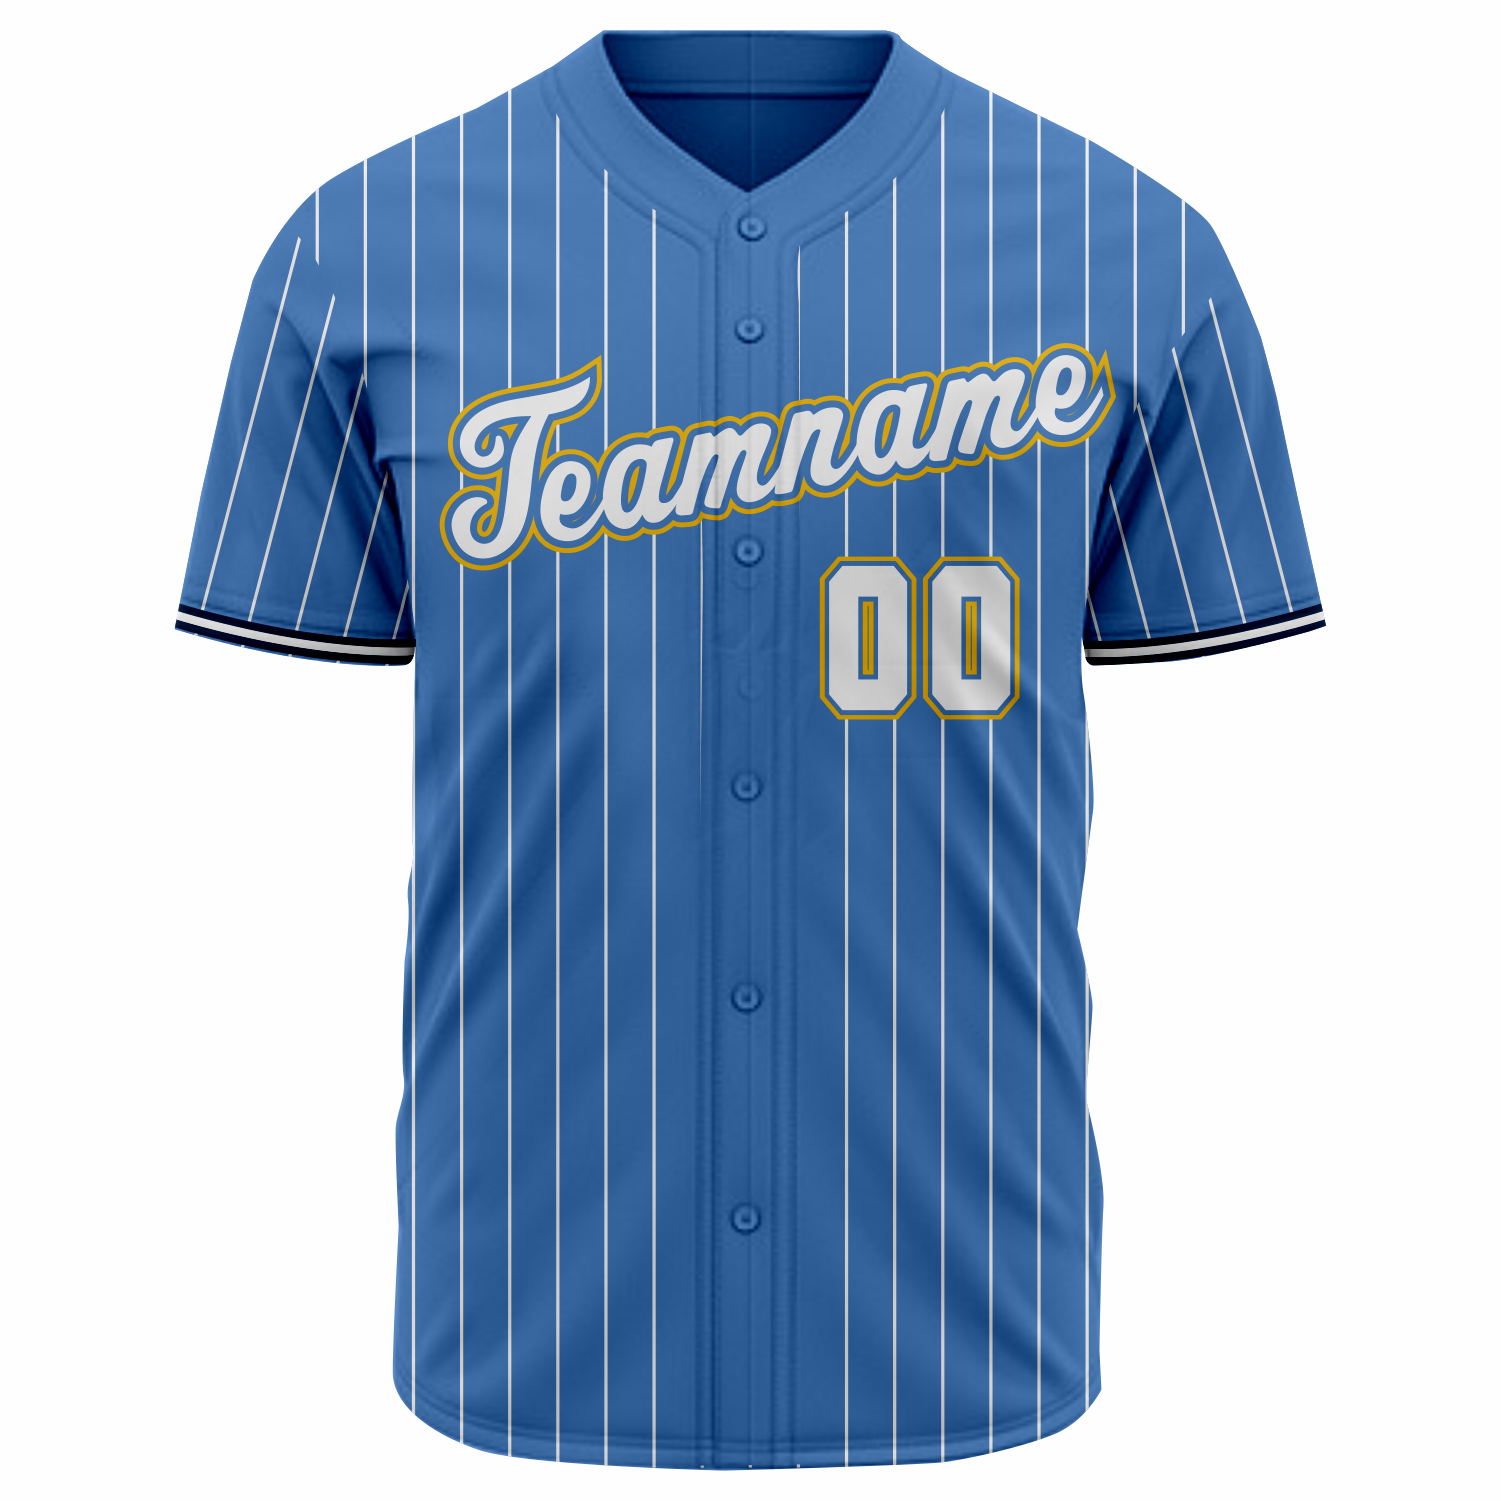 Pacific SS Blue Baseball Jersey with Customization Available